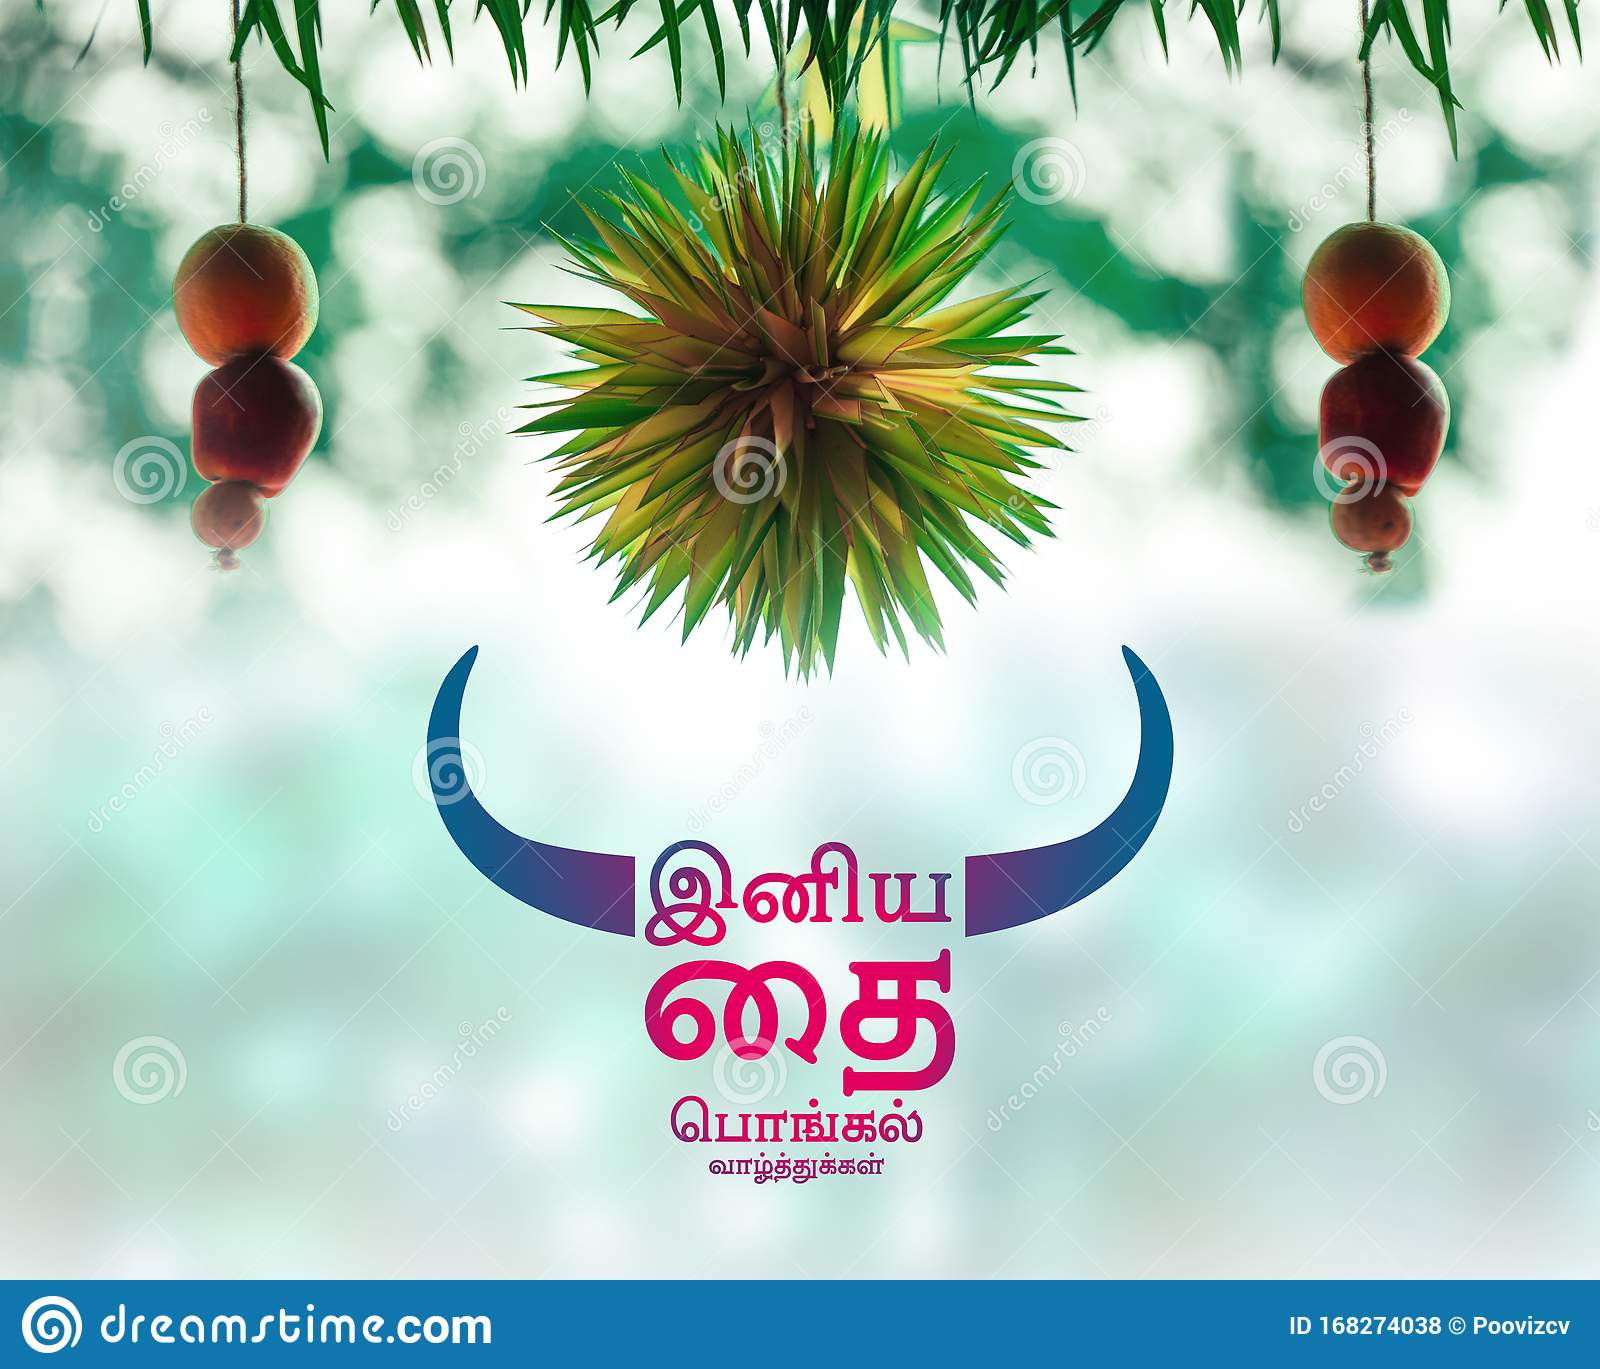 Happy pongal wishes in tamil stock photo